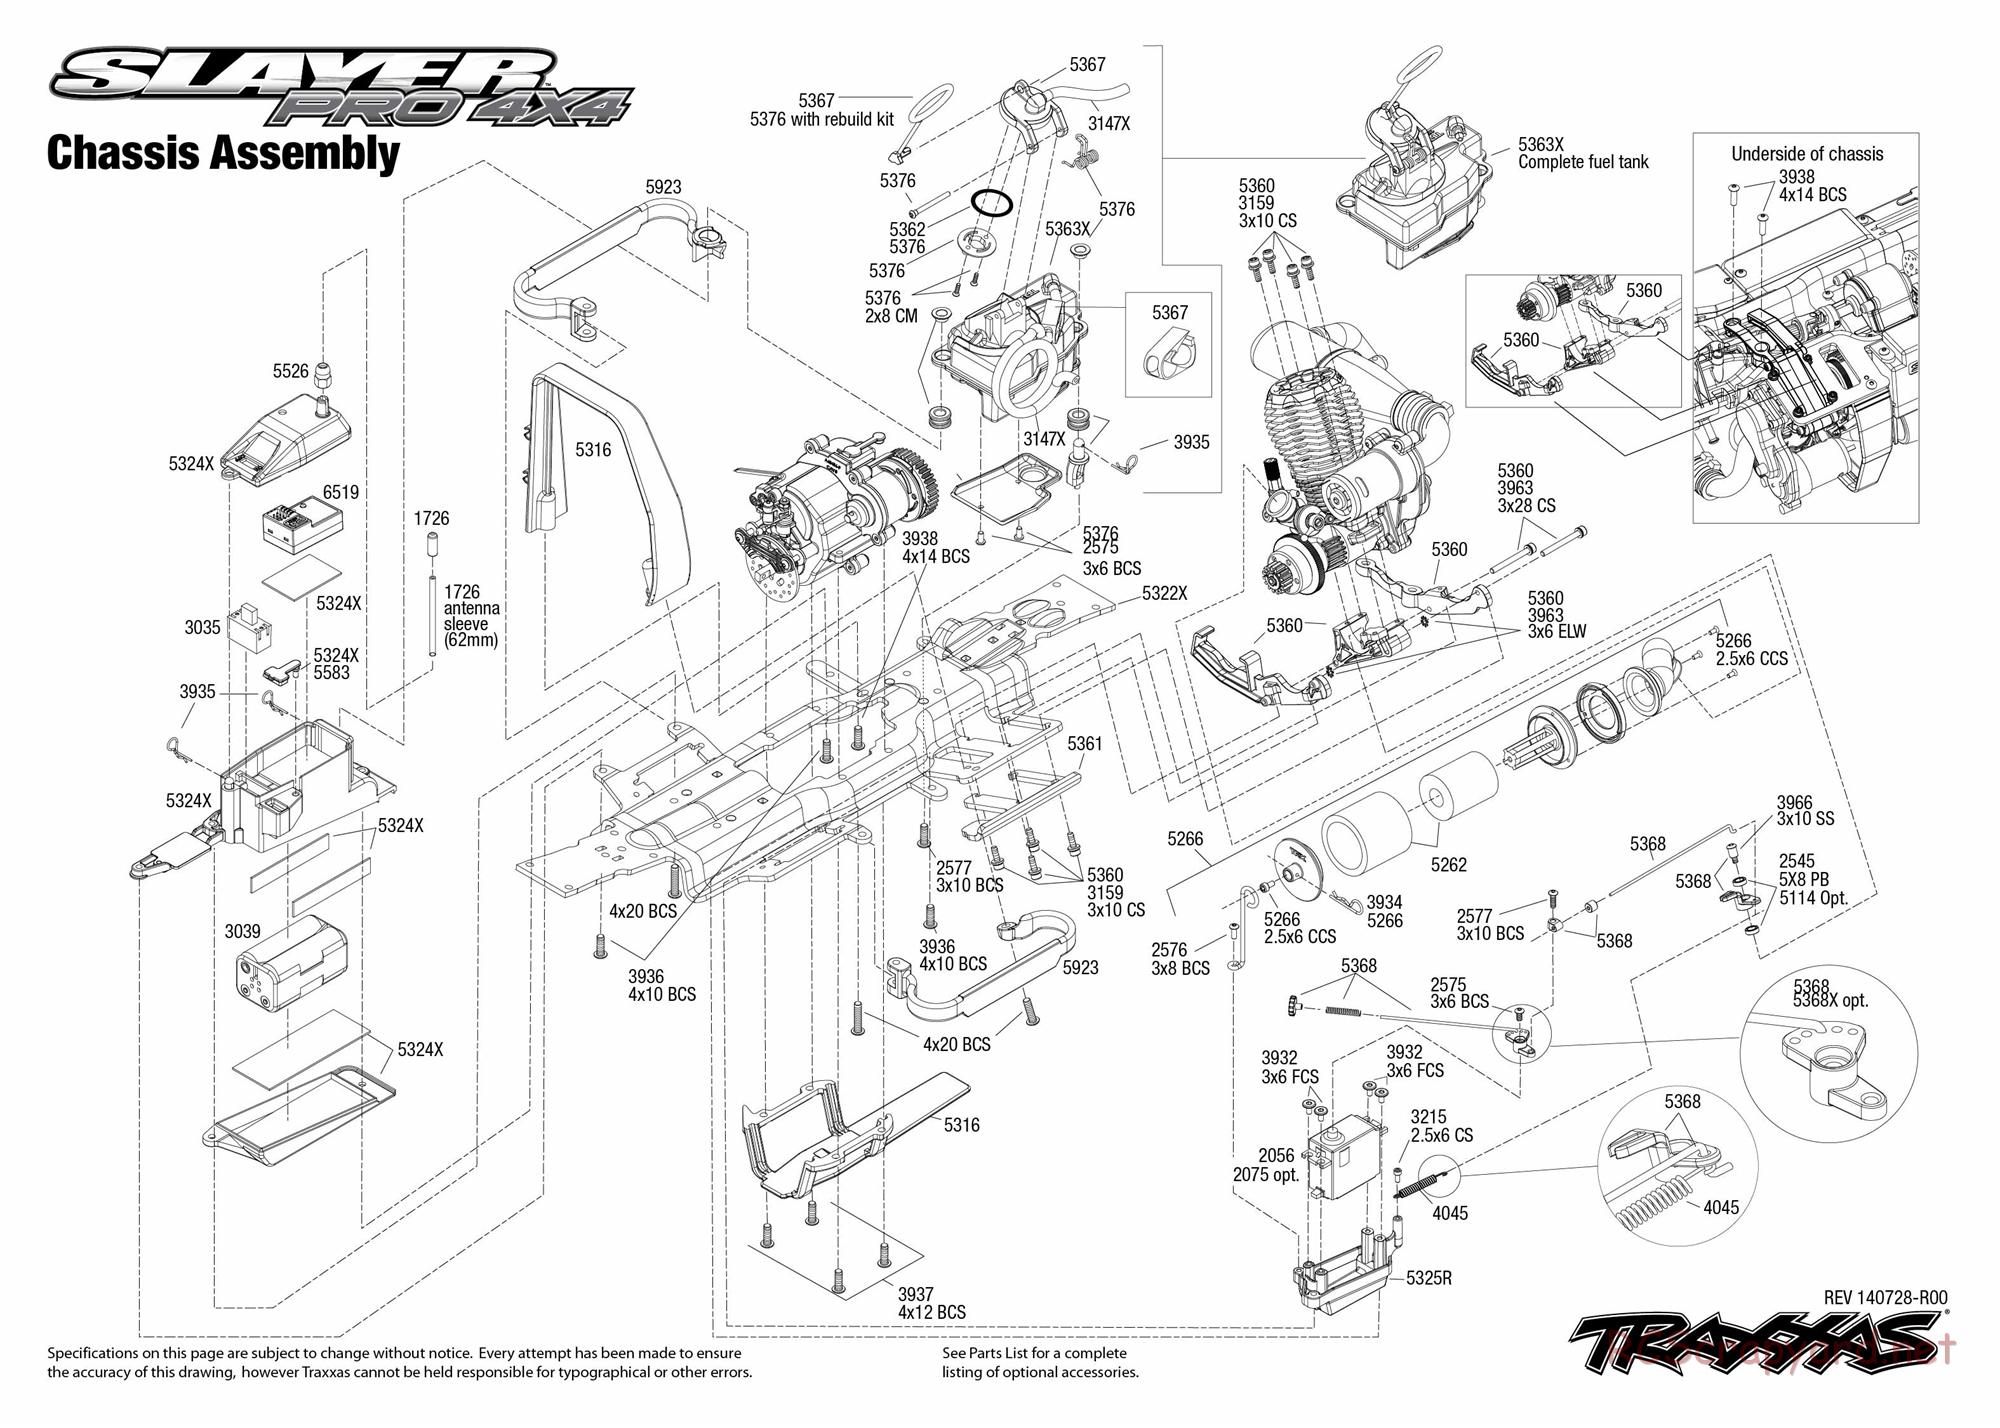 Traxxas - Slayer Pro 4x4 (2014) - Exploded Views - Page 1